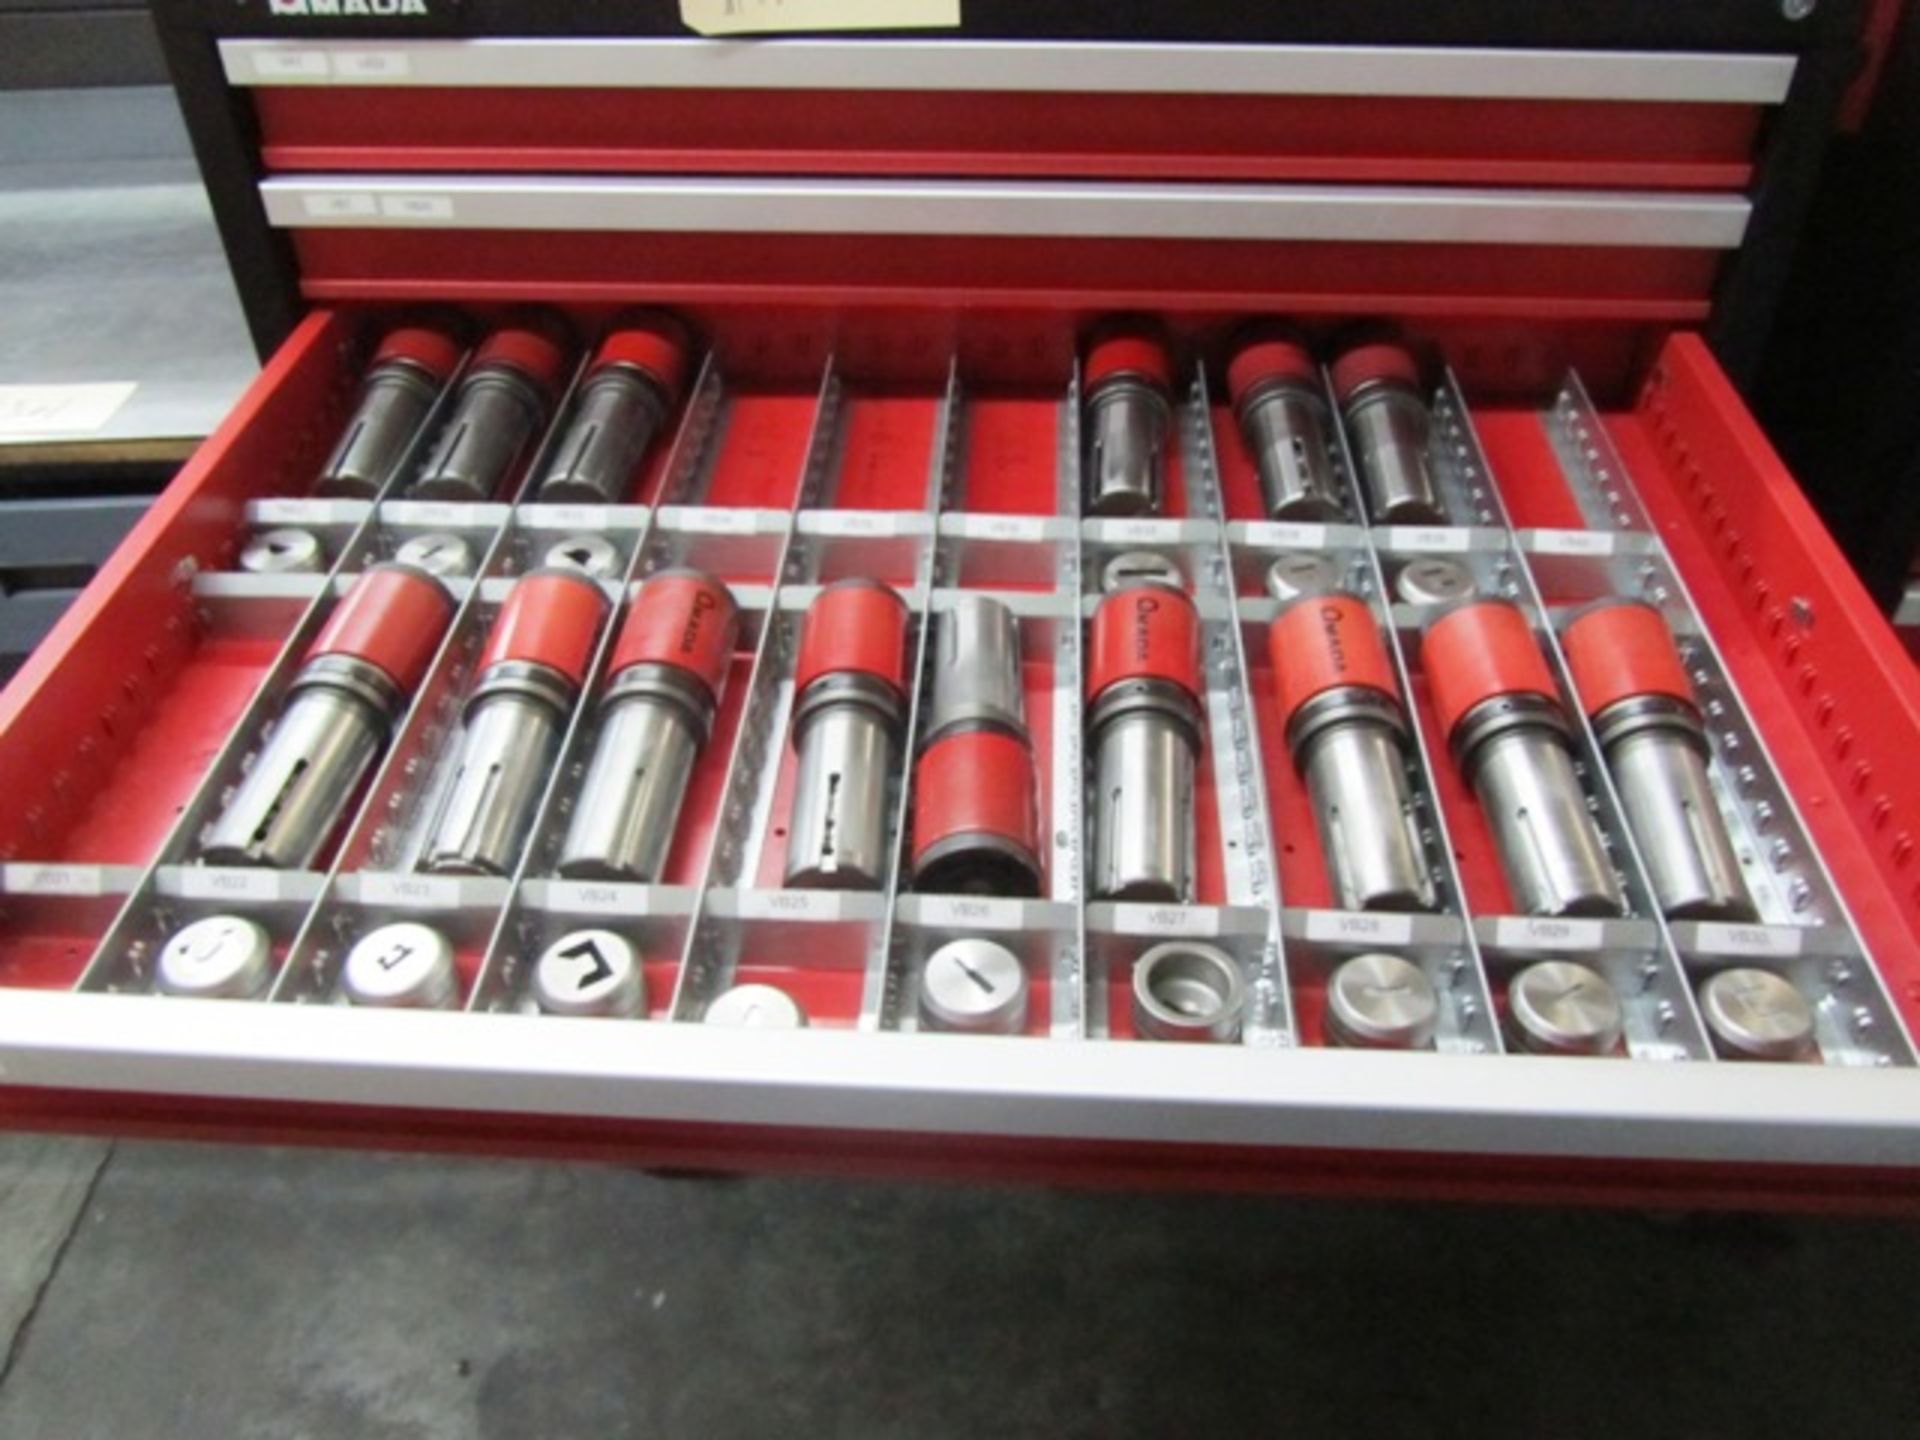 Amada 8 Drawer Portable Tool Cabinet with Turret Punches & Dies - Image 4 of 8